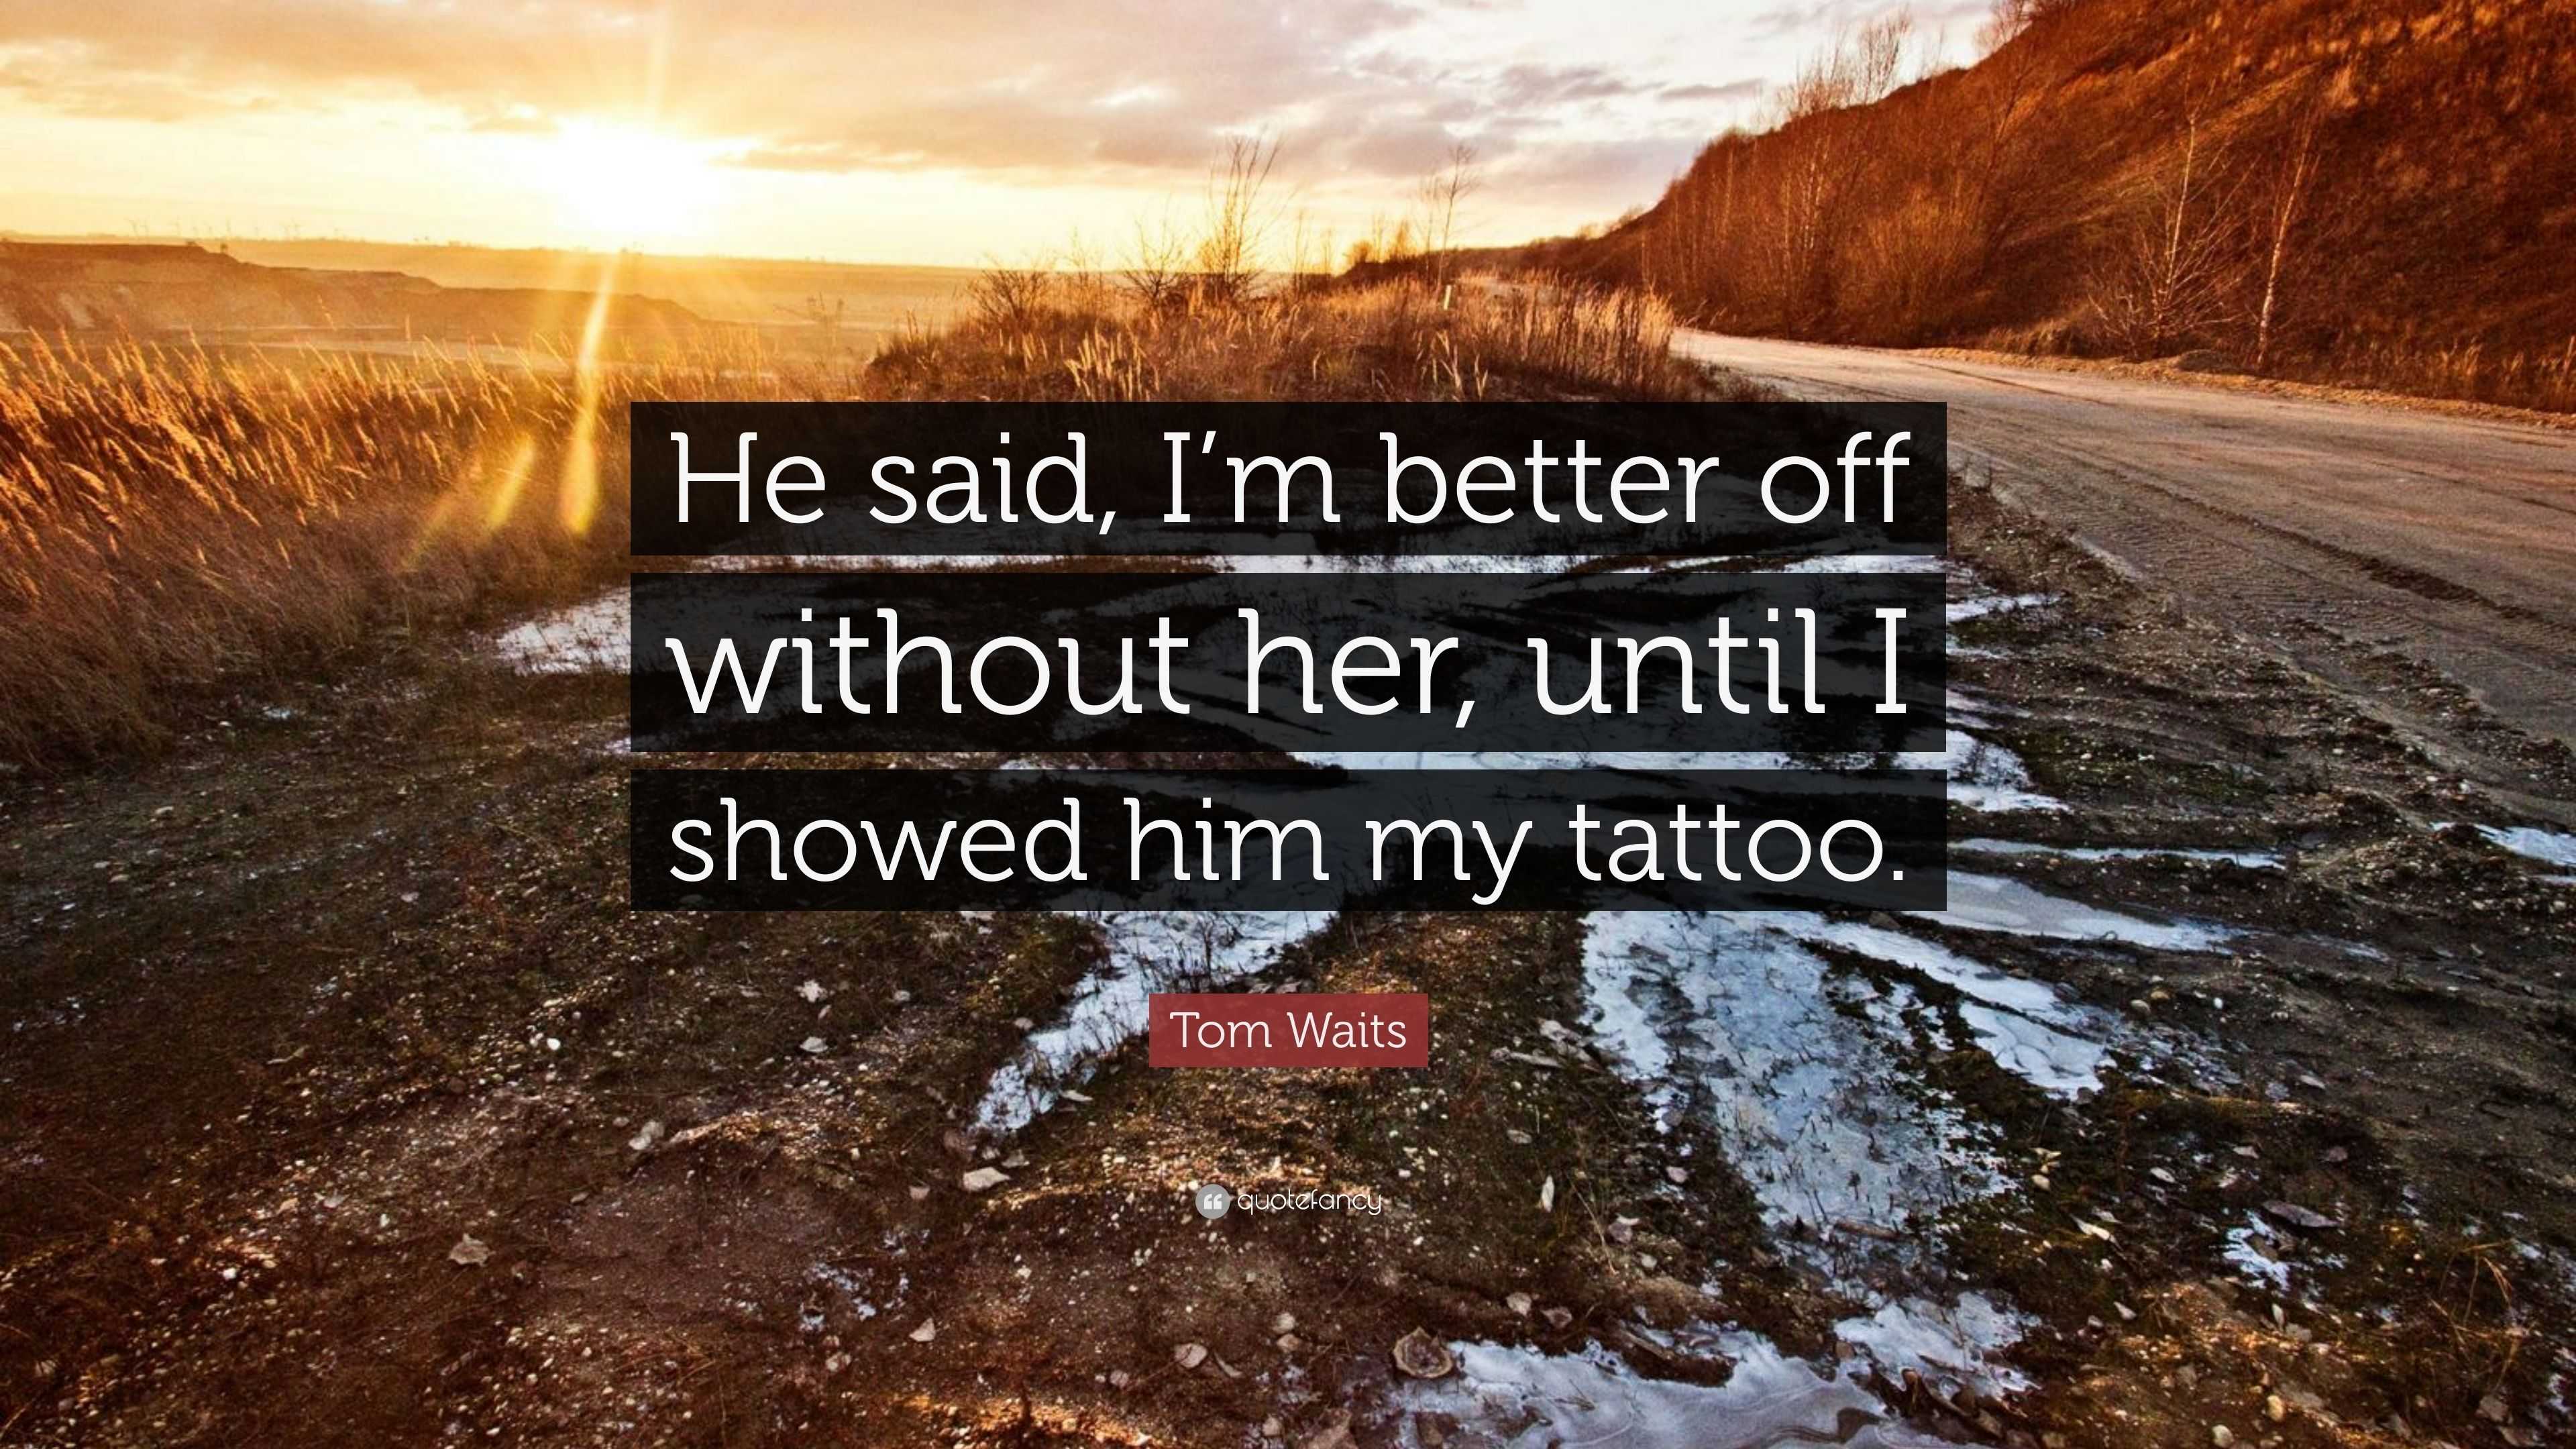 Tom Waits Quote: “He said, I'm better off without her, until I showed him my